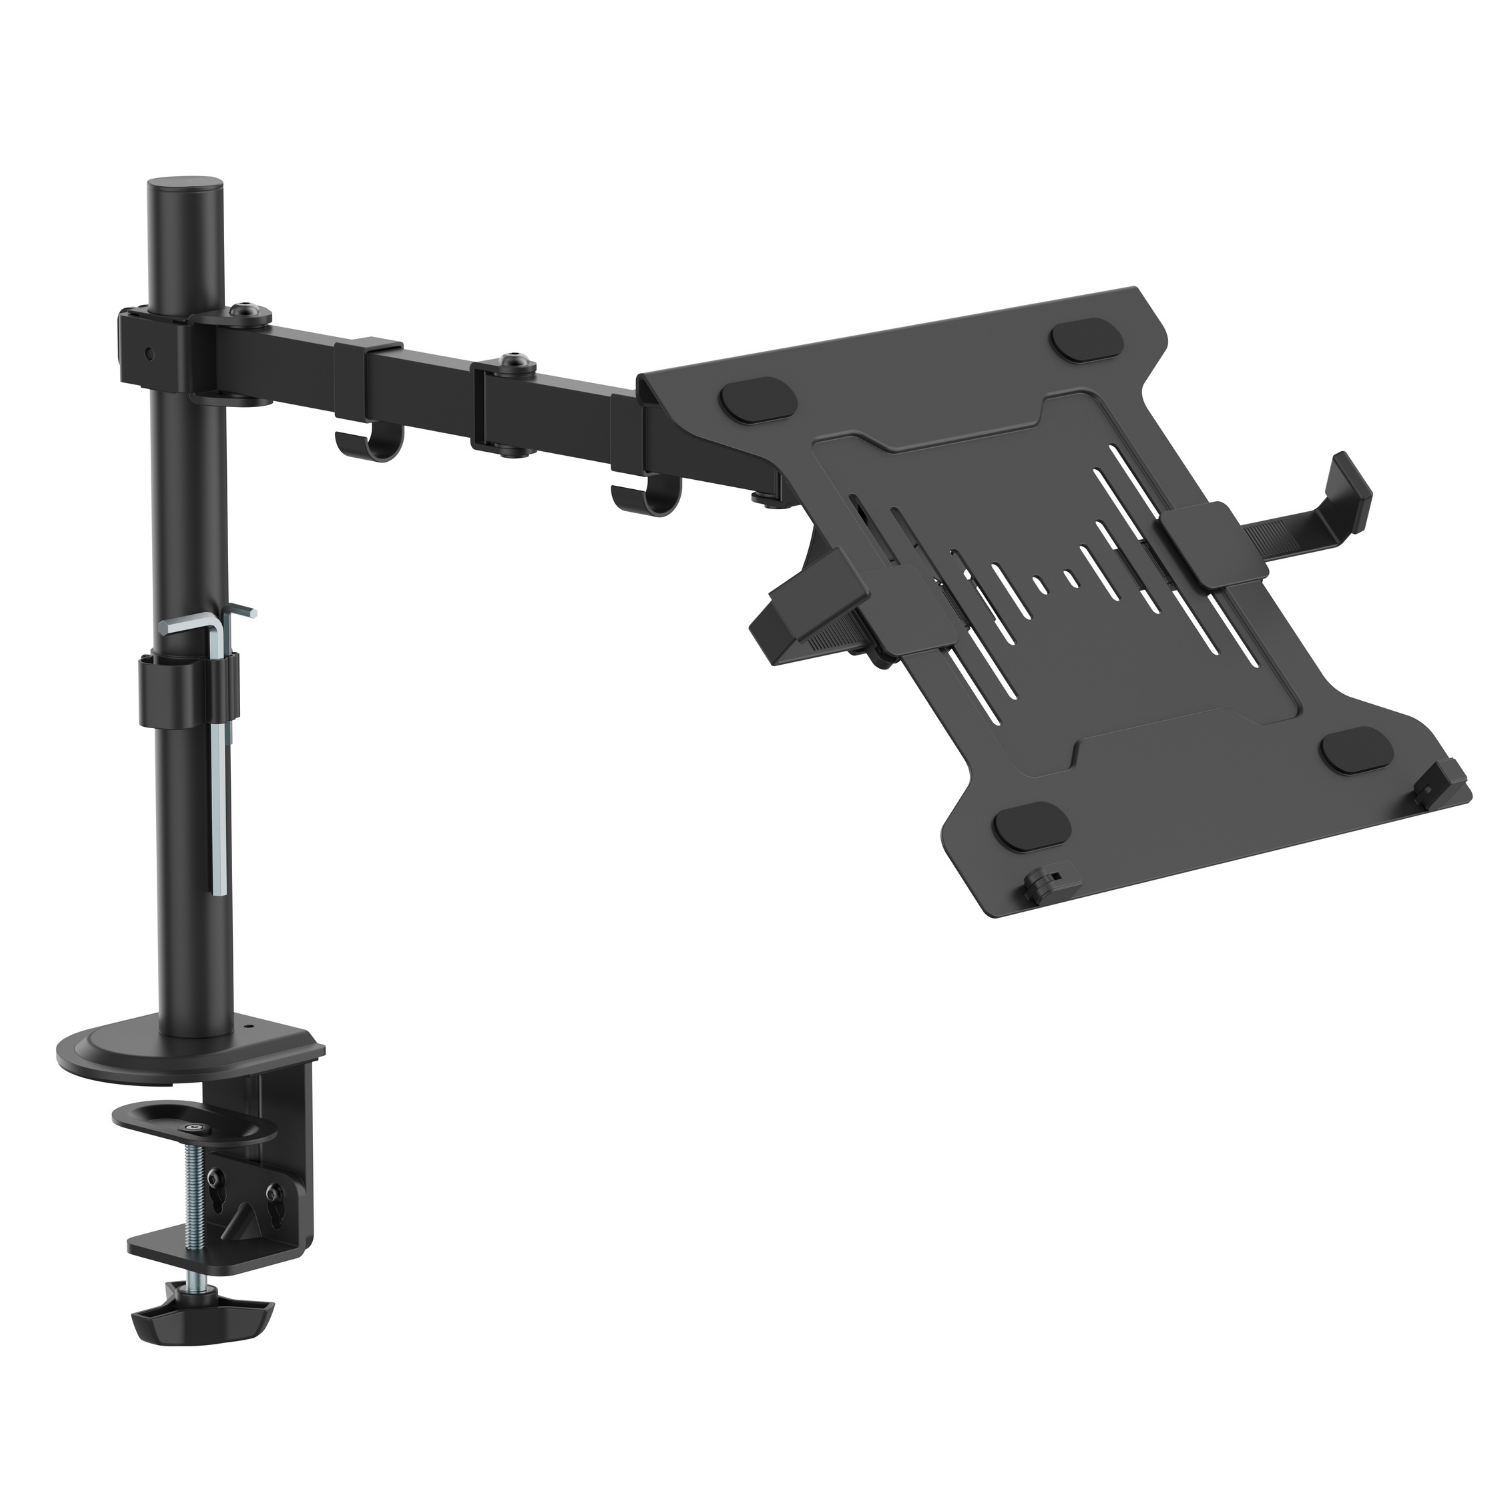 AnthroDesk Laptop / Notebook Desk Stand / Mount with Full Motion Adjustable Extension Arm with Tilt